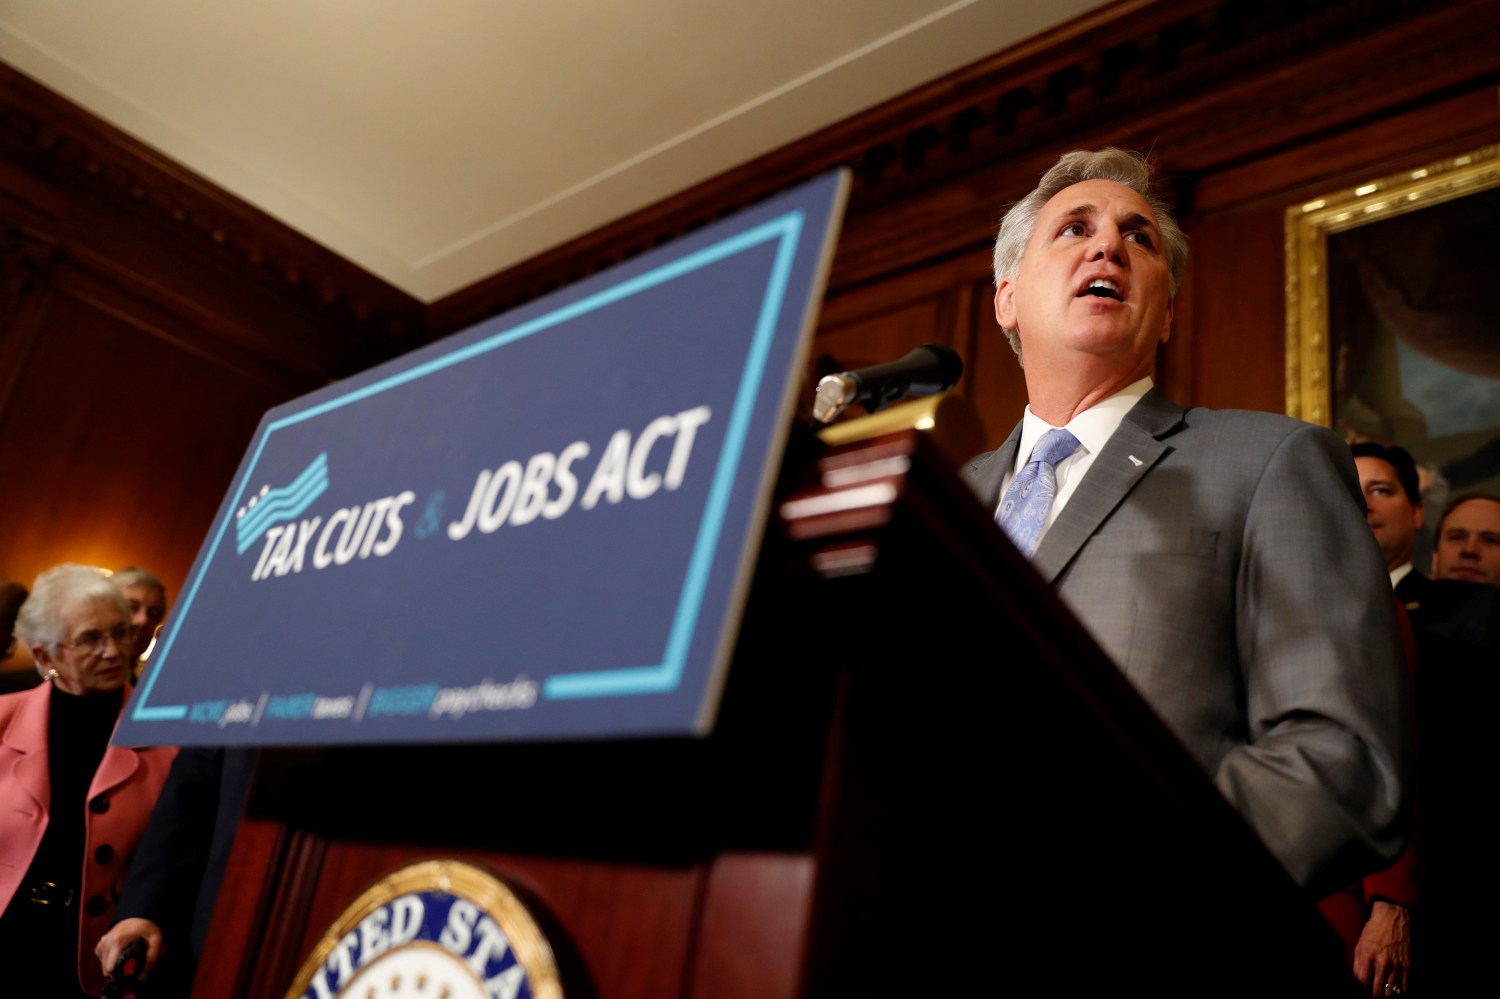 House Majority Leader Rep. Kevin McCarthy (R-CA) speaks at news conference announcing the passage of the "Tax Cuts and Jobs Act" at the U.S. Capitol in Washington, U.S., November 16, 2017. REUTERS/Aaron P. Bernstein